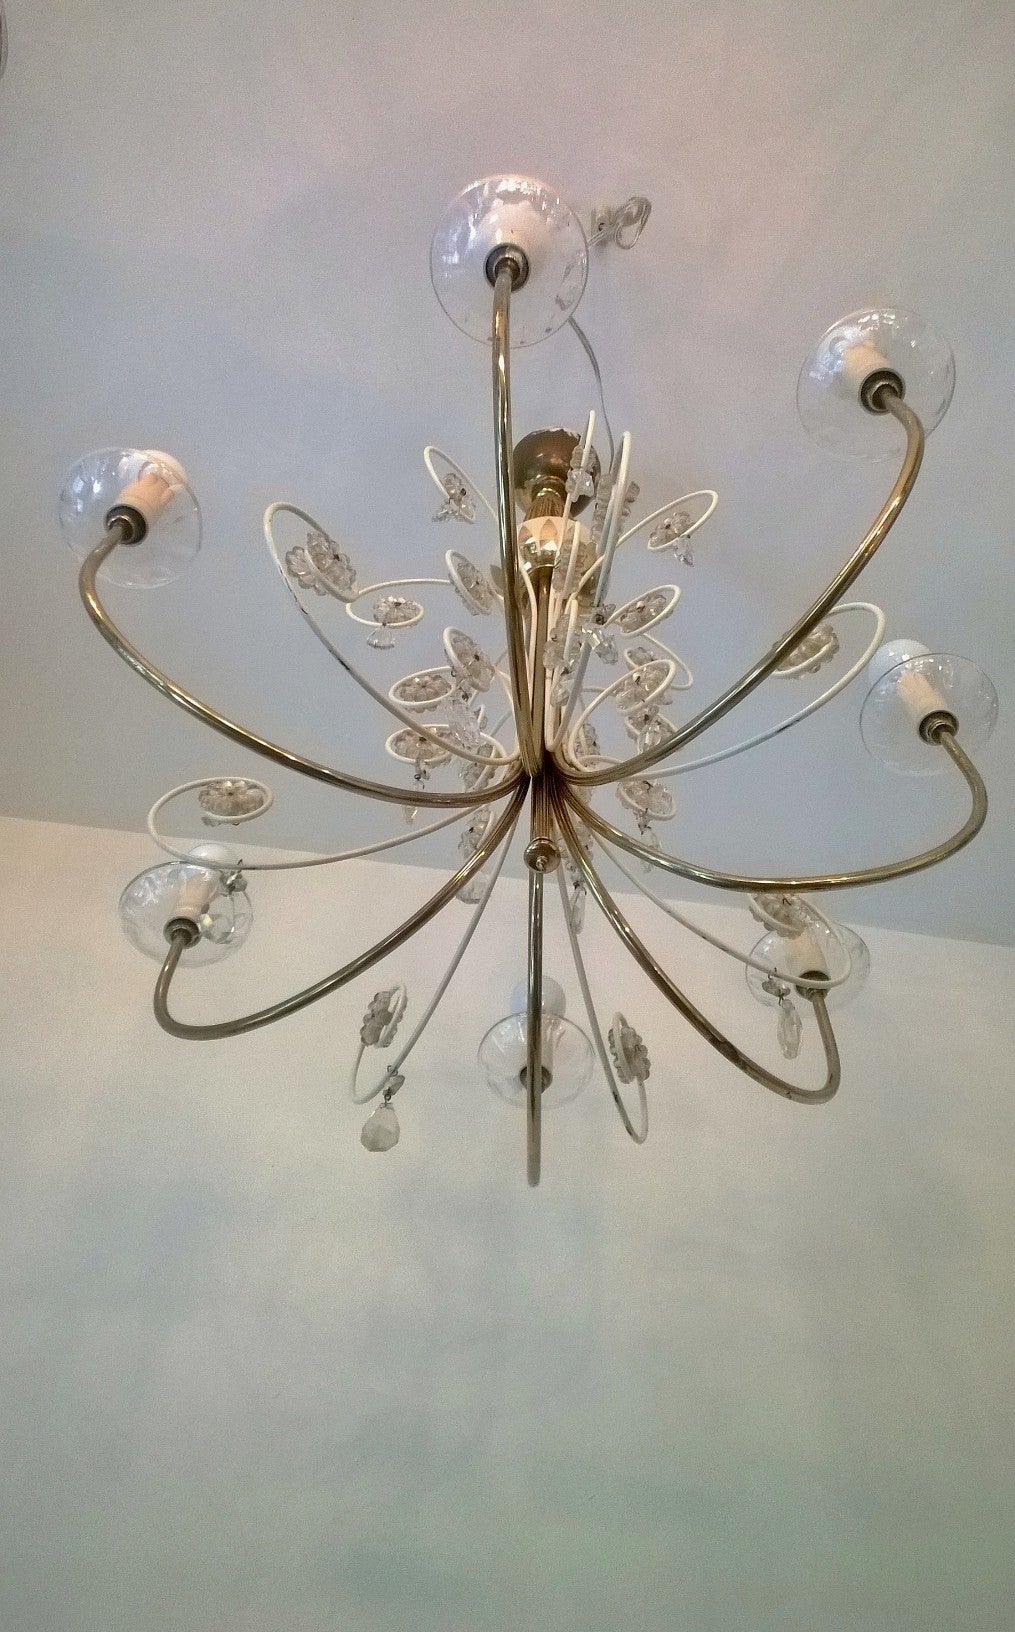 A wonderful rare 1950s Austrian crystal, polished brass, and white enamel chandelier by Emil Stejnar for Rupert Nikoll . Rewired. The ceiling pole can be lengthened if needed.